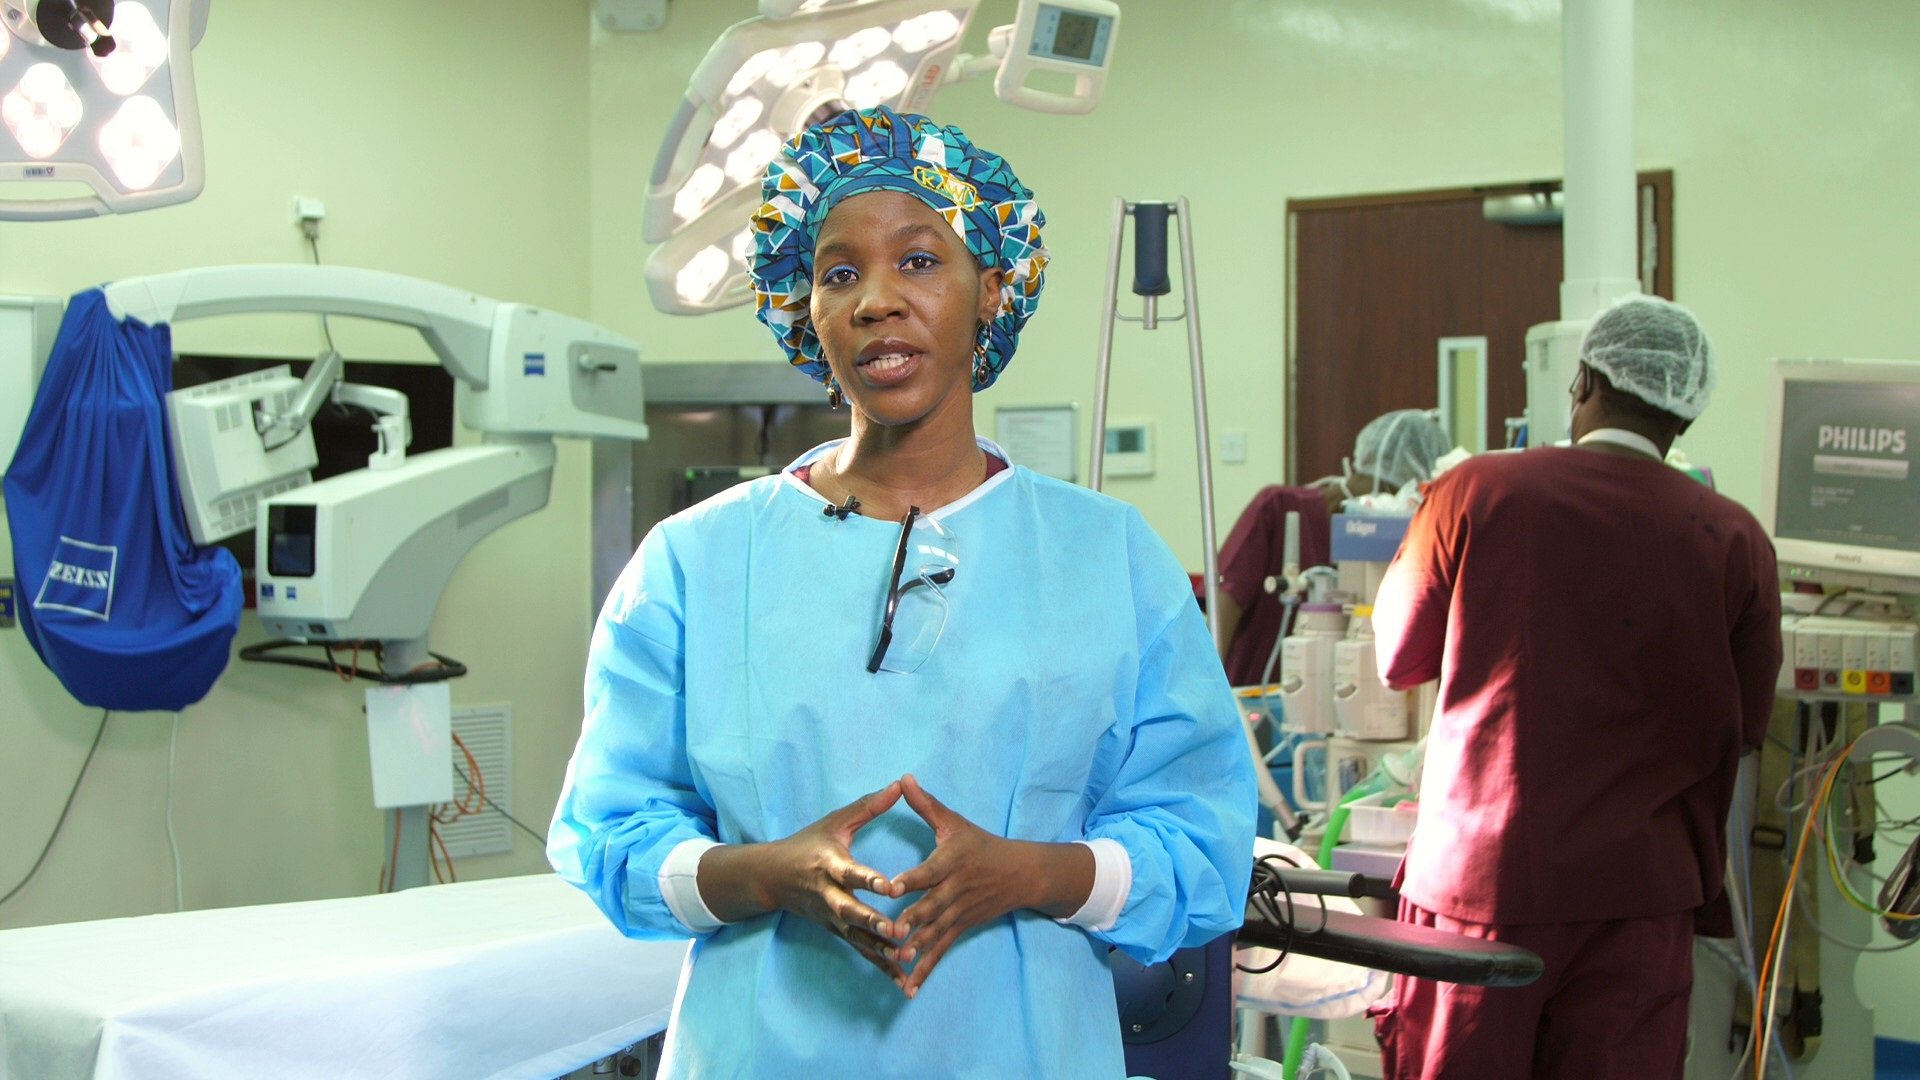 Addressing inequities in breast cancer treatment in sub-Saharan Africa: insights from a breast cancer surgeon in Nairobi